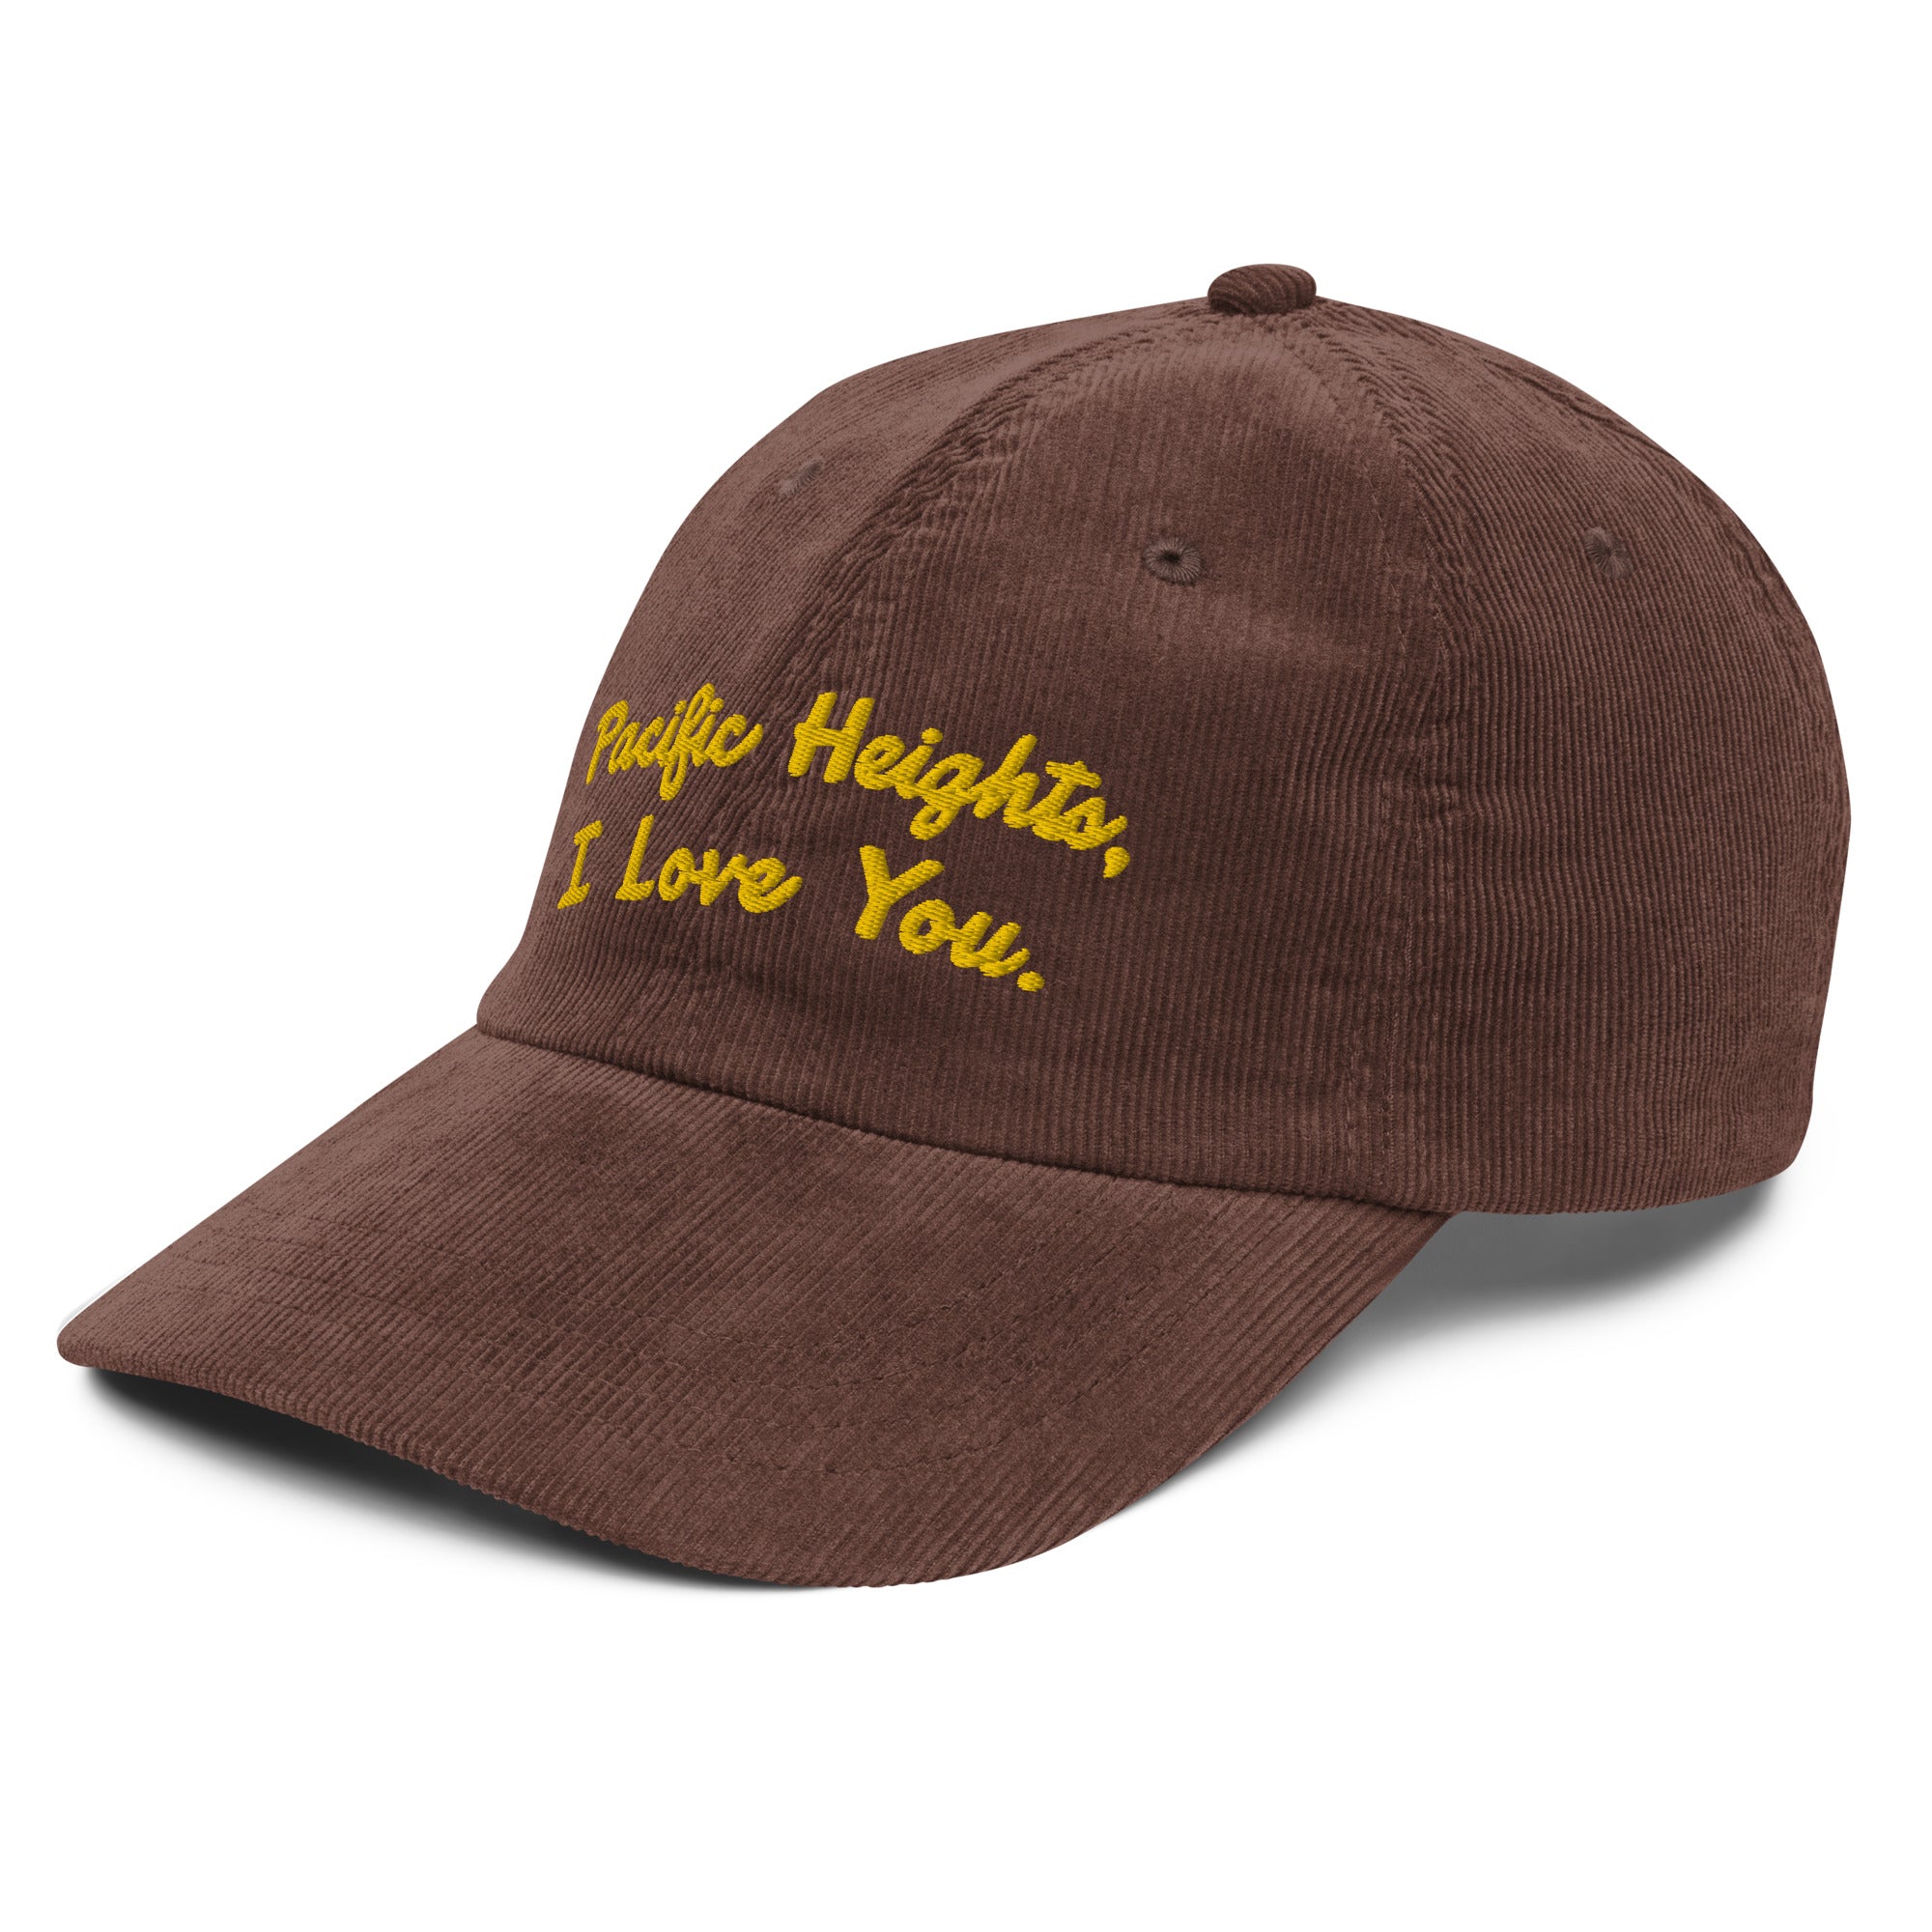 I Love You Corduroy Hat - Pacific Heights | San Francisco, CA